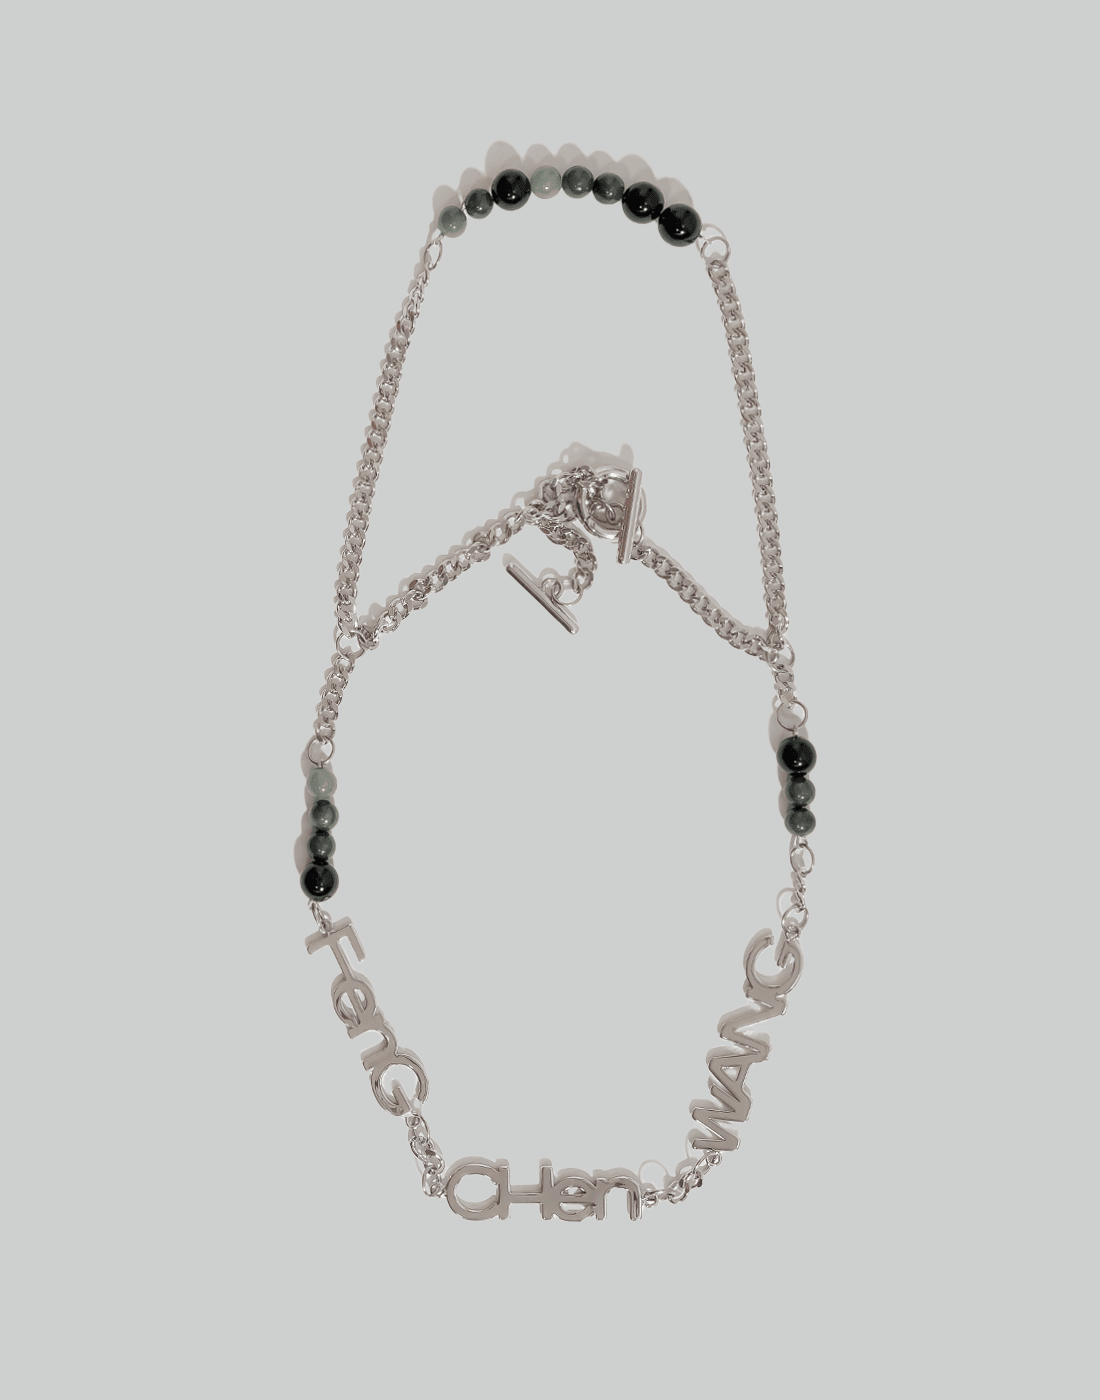 FENG CHEN WANG JADE ONYX NECKLACE - 082plus